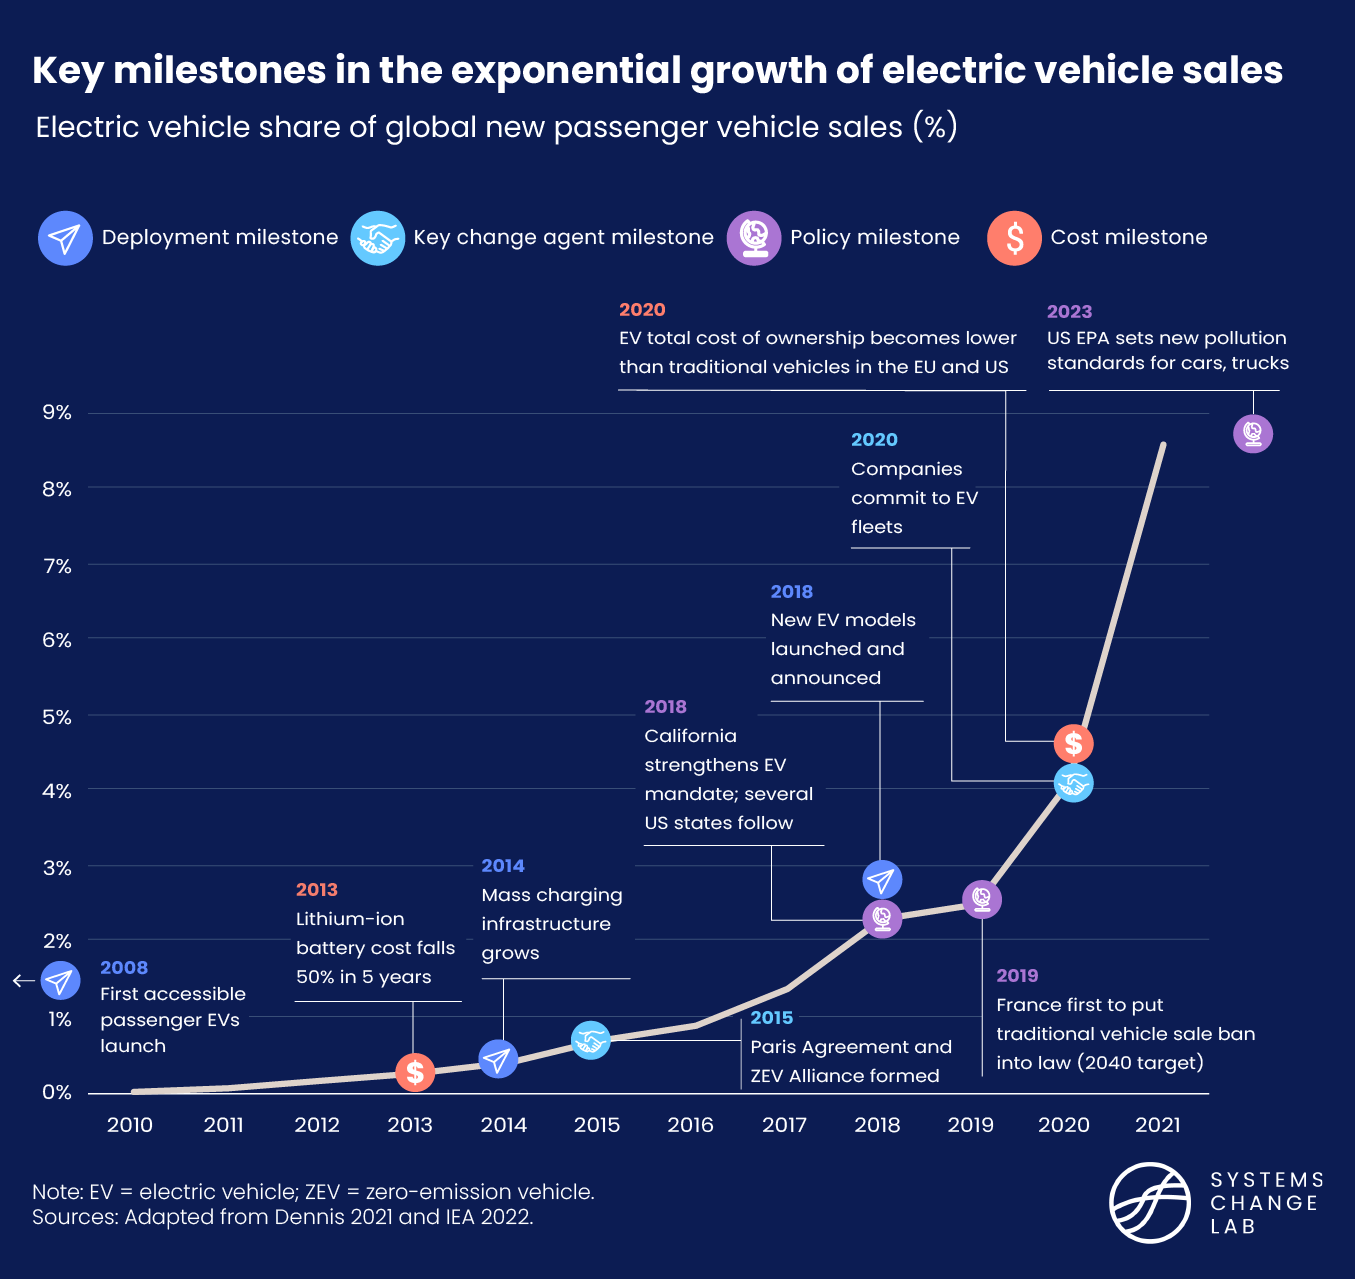 Timeline showing Key milestones in the exponential growth of electric vehicle sales compared to the EV share of global new passenger vehicle sales